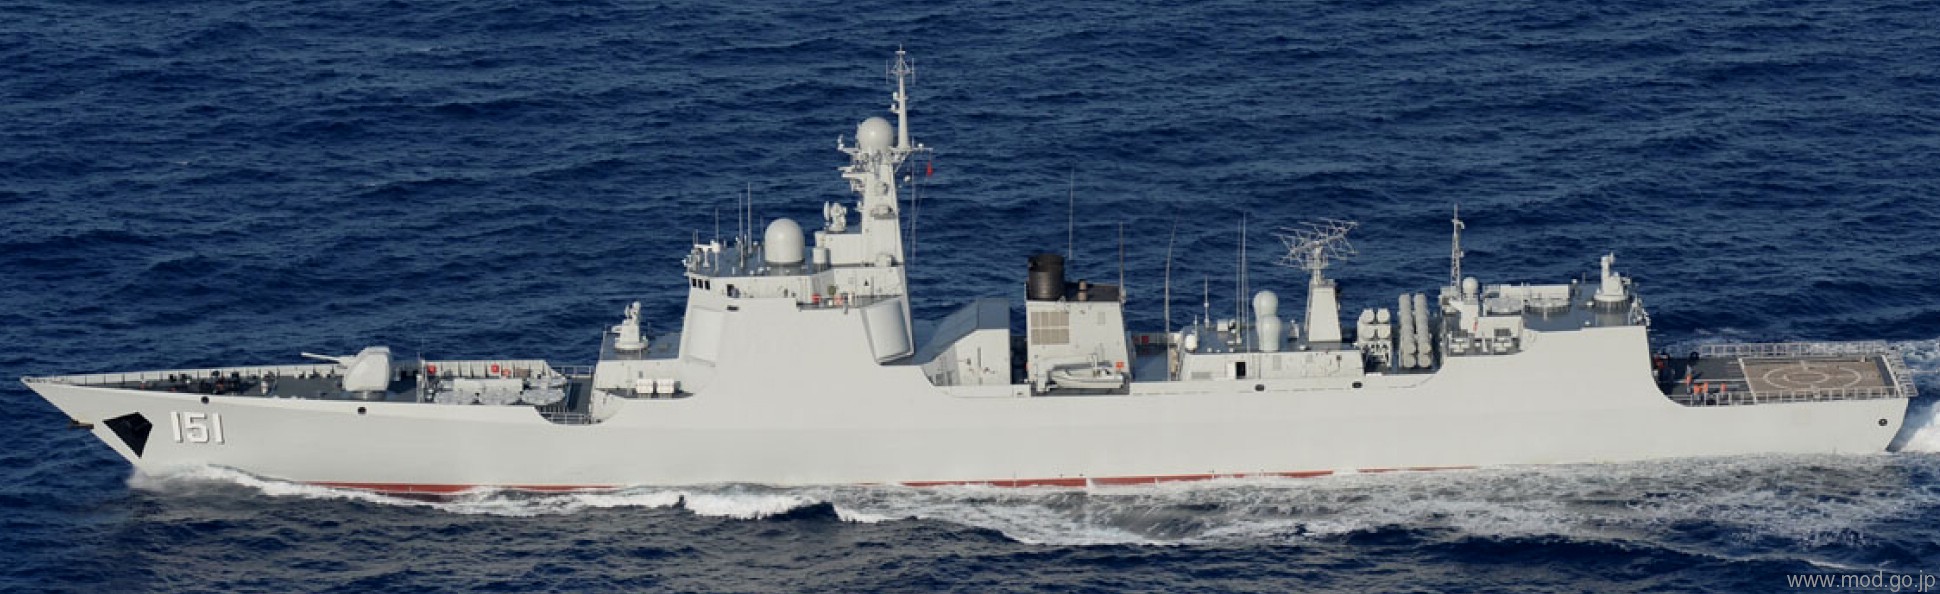 ddg-151 plans zhengzhou type 052c class guided missile destroyer china people's liberation army navy 02